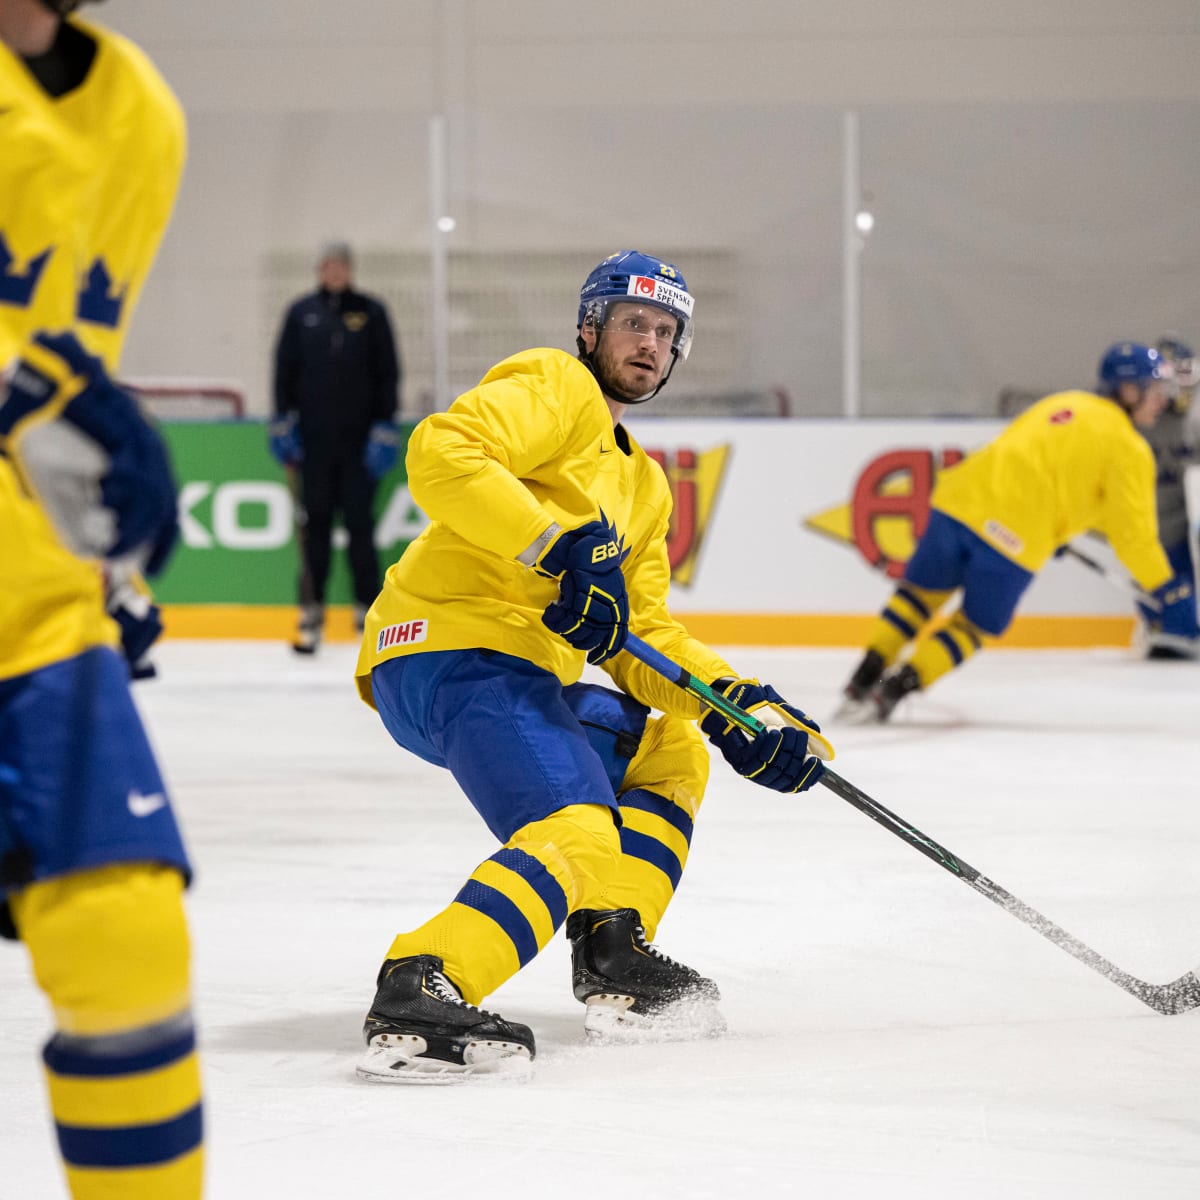 Czech Republic vs Sweden stream Watch hockey online, TV channel - How to Watch and Stream Major League and College Sports